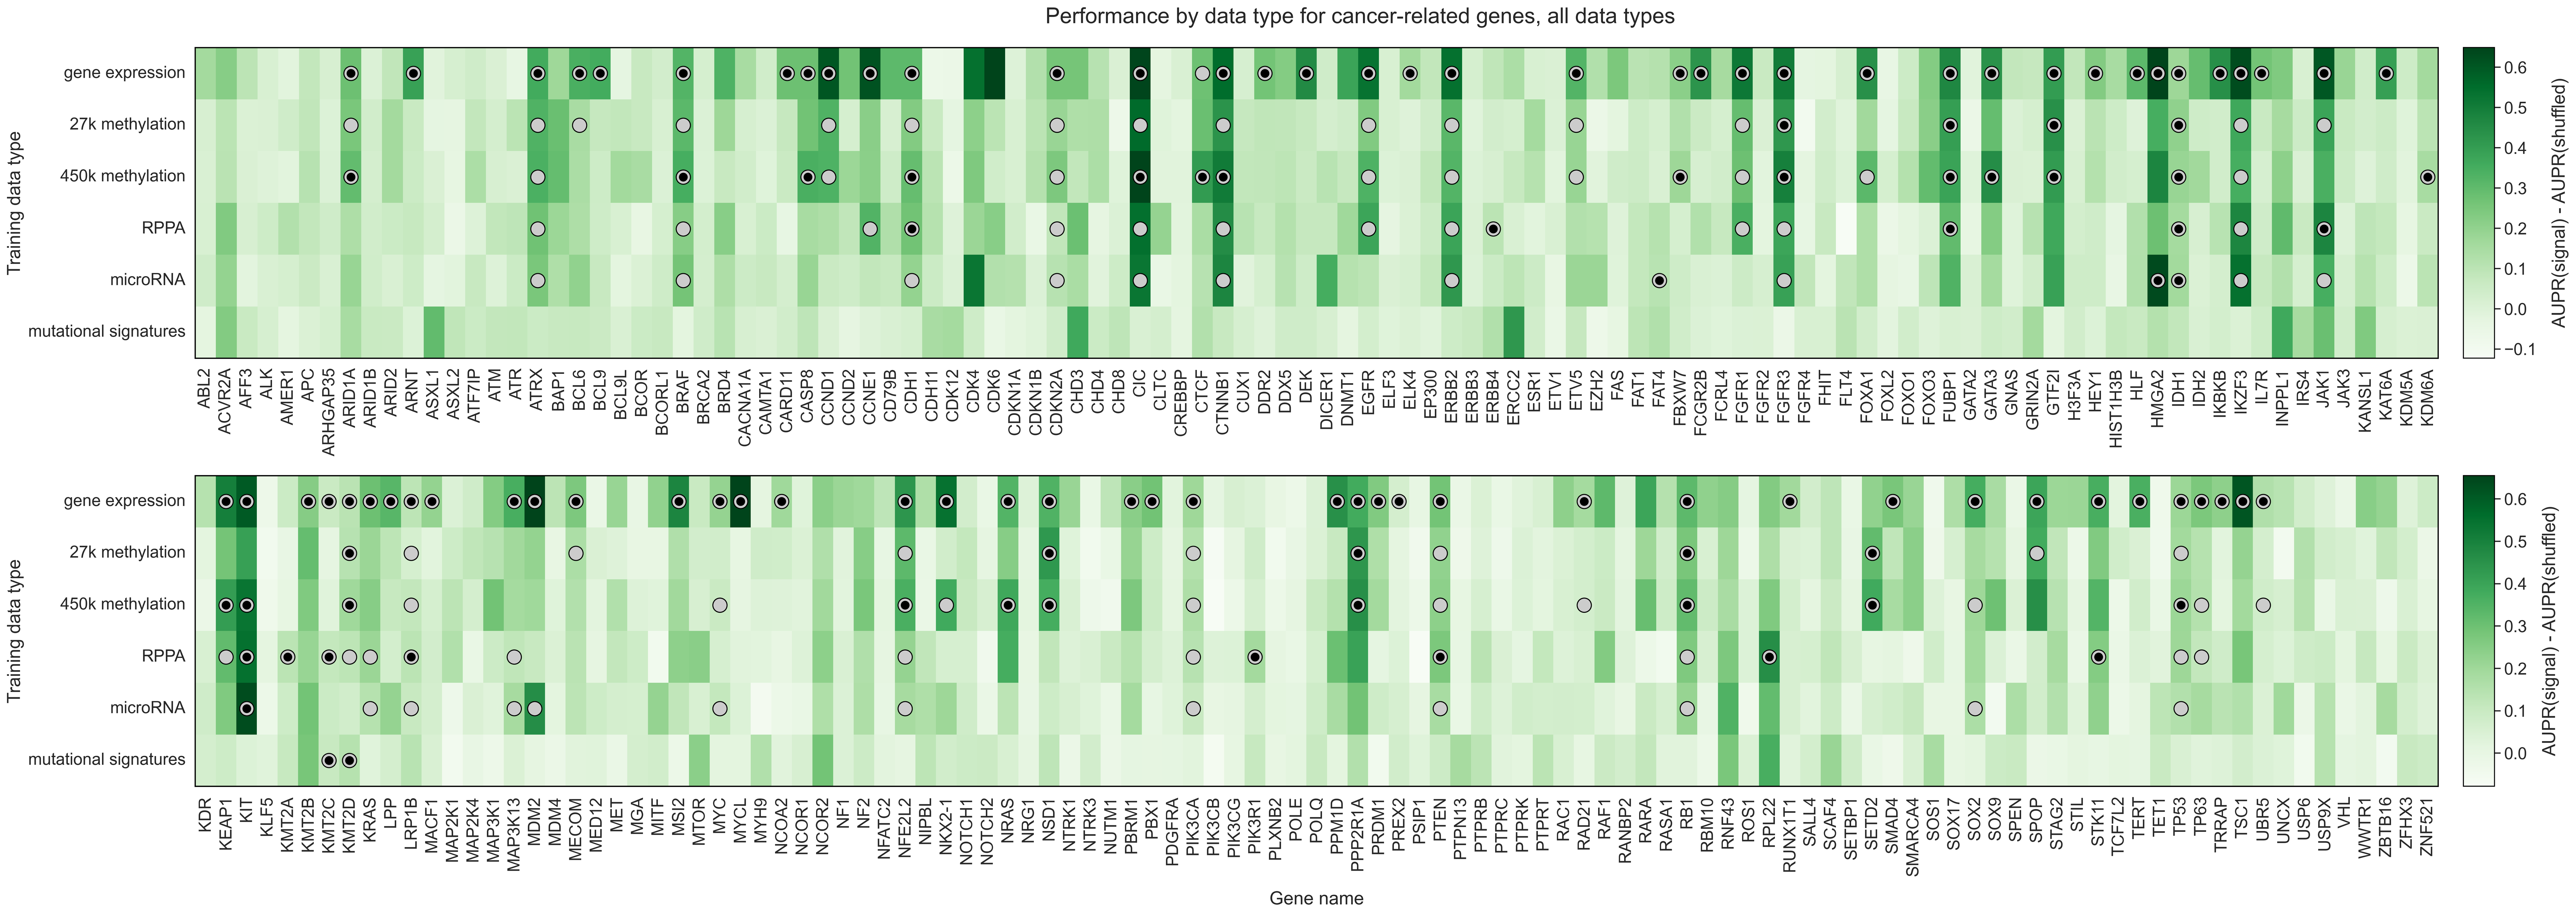 Figure 6: Heatmap displaying predictive performance for mutations in each of the 217 genes from the cancer-related gene set, across all six TCGA data modalities. Each cell quantifies performance for a target gene, using predictive features derived from a particular data type. Grey shaded dots indicate that the given data type provides significantly better predictions than the permuted baseline for the given gene; black inner dots indicate the same and additionally that the given data type provides statistically equivalent performance to the data type with the best average performance (determined by pairwise t-tests across data types with FDR correction).